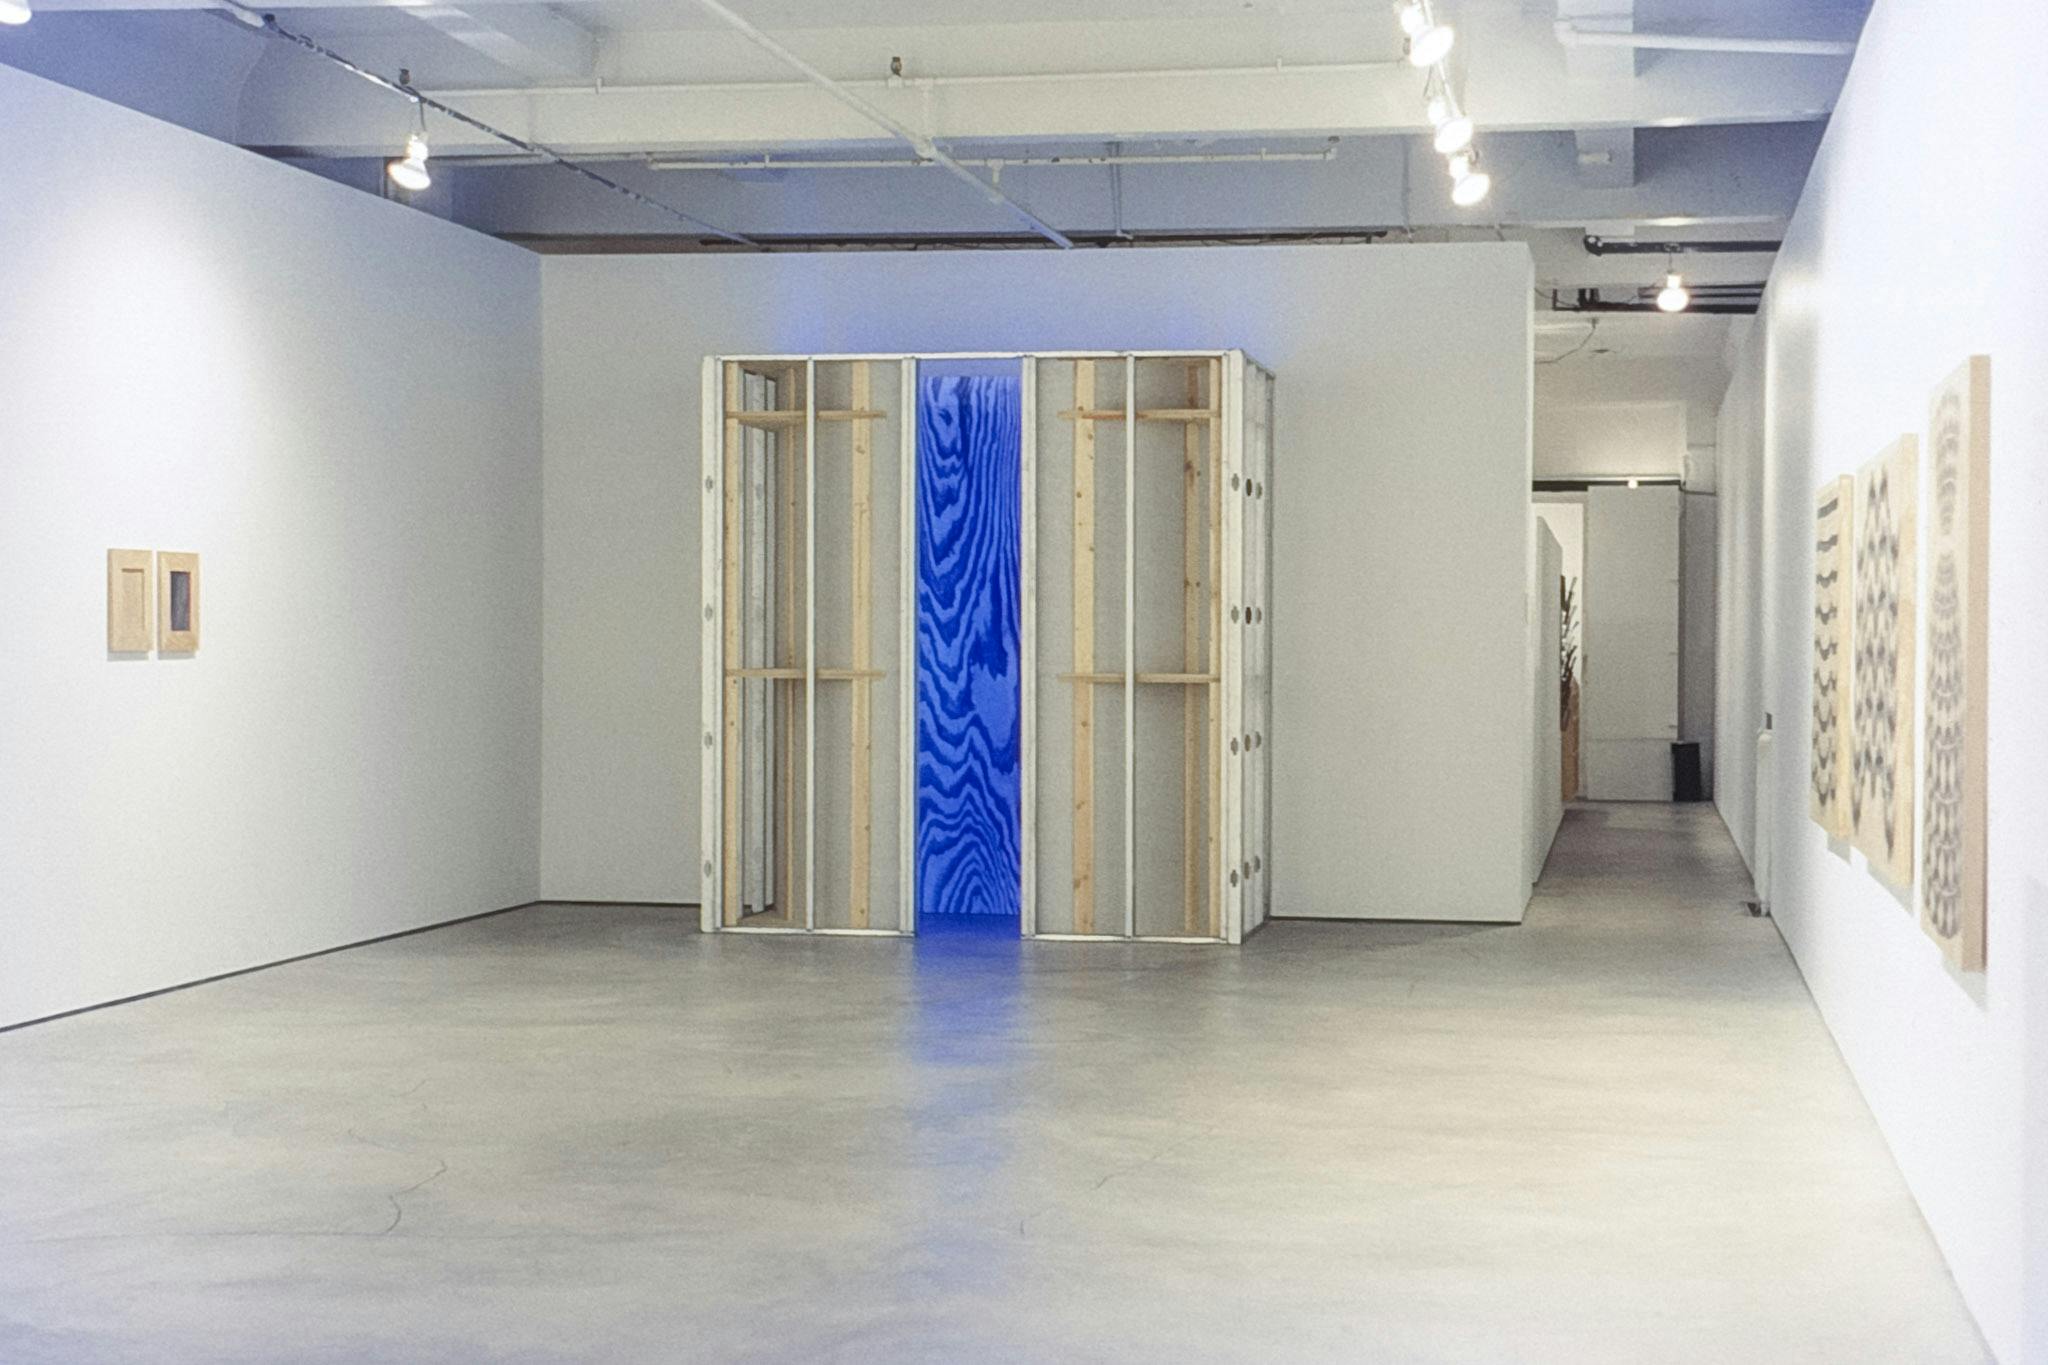 A gallery space with artworks on the walls. The work in the centre is a large sculpture made of a wooden frame. The opening of the structure shows a large wood-pattern lit in bright blue.